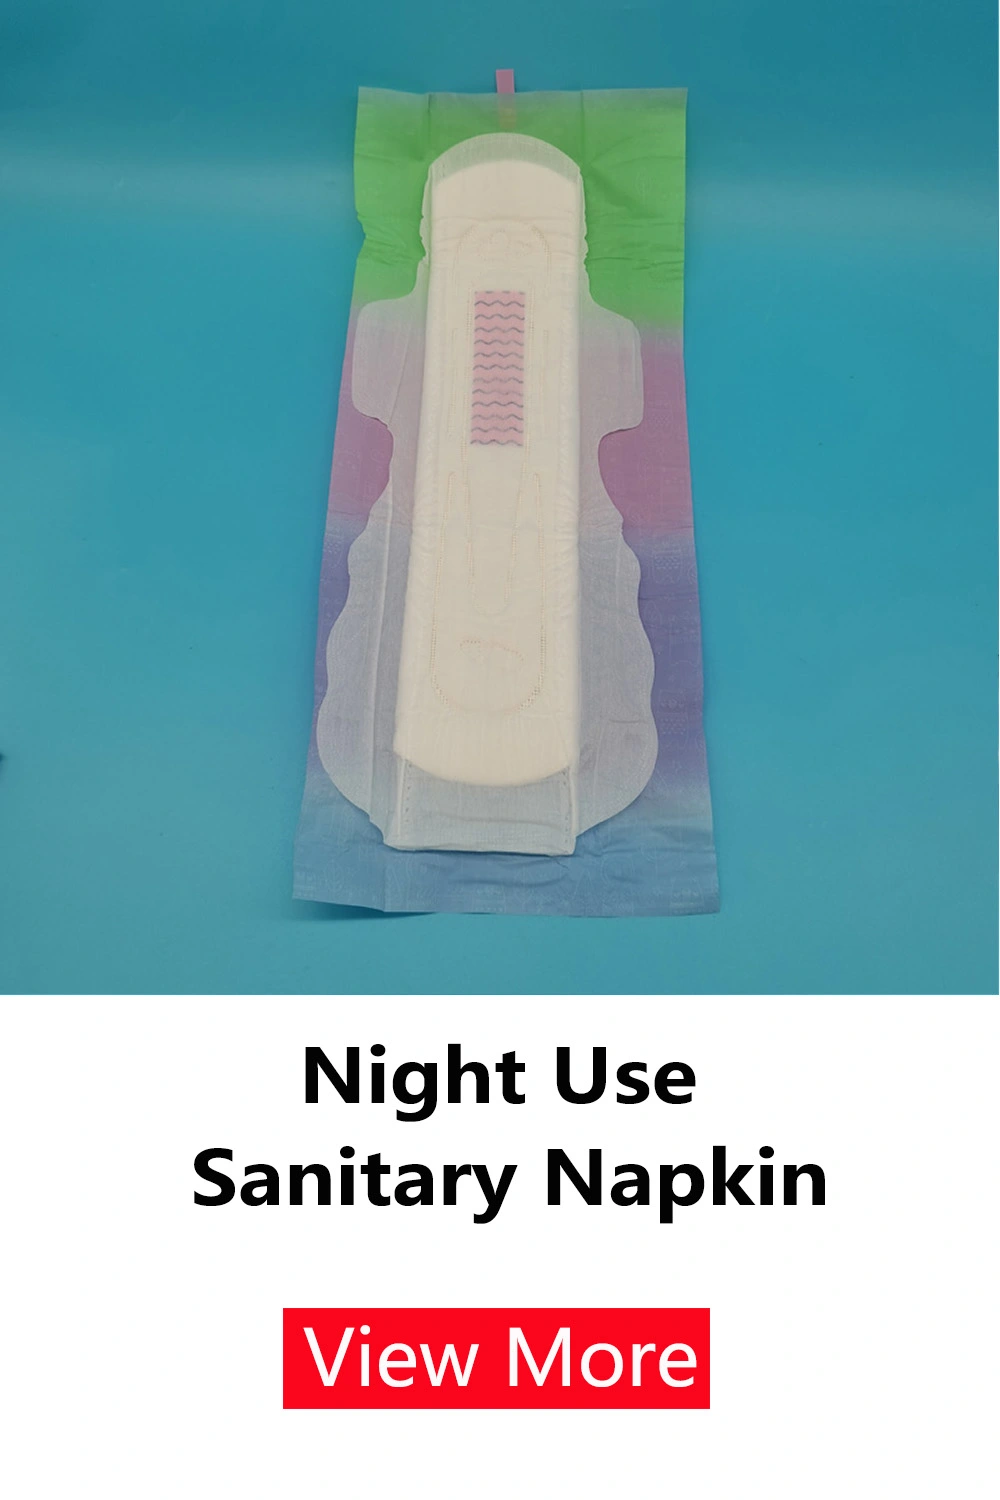 Maternity pad and sanitary napkin picture